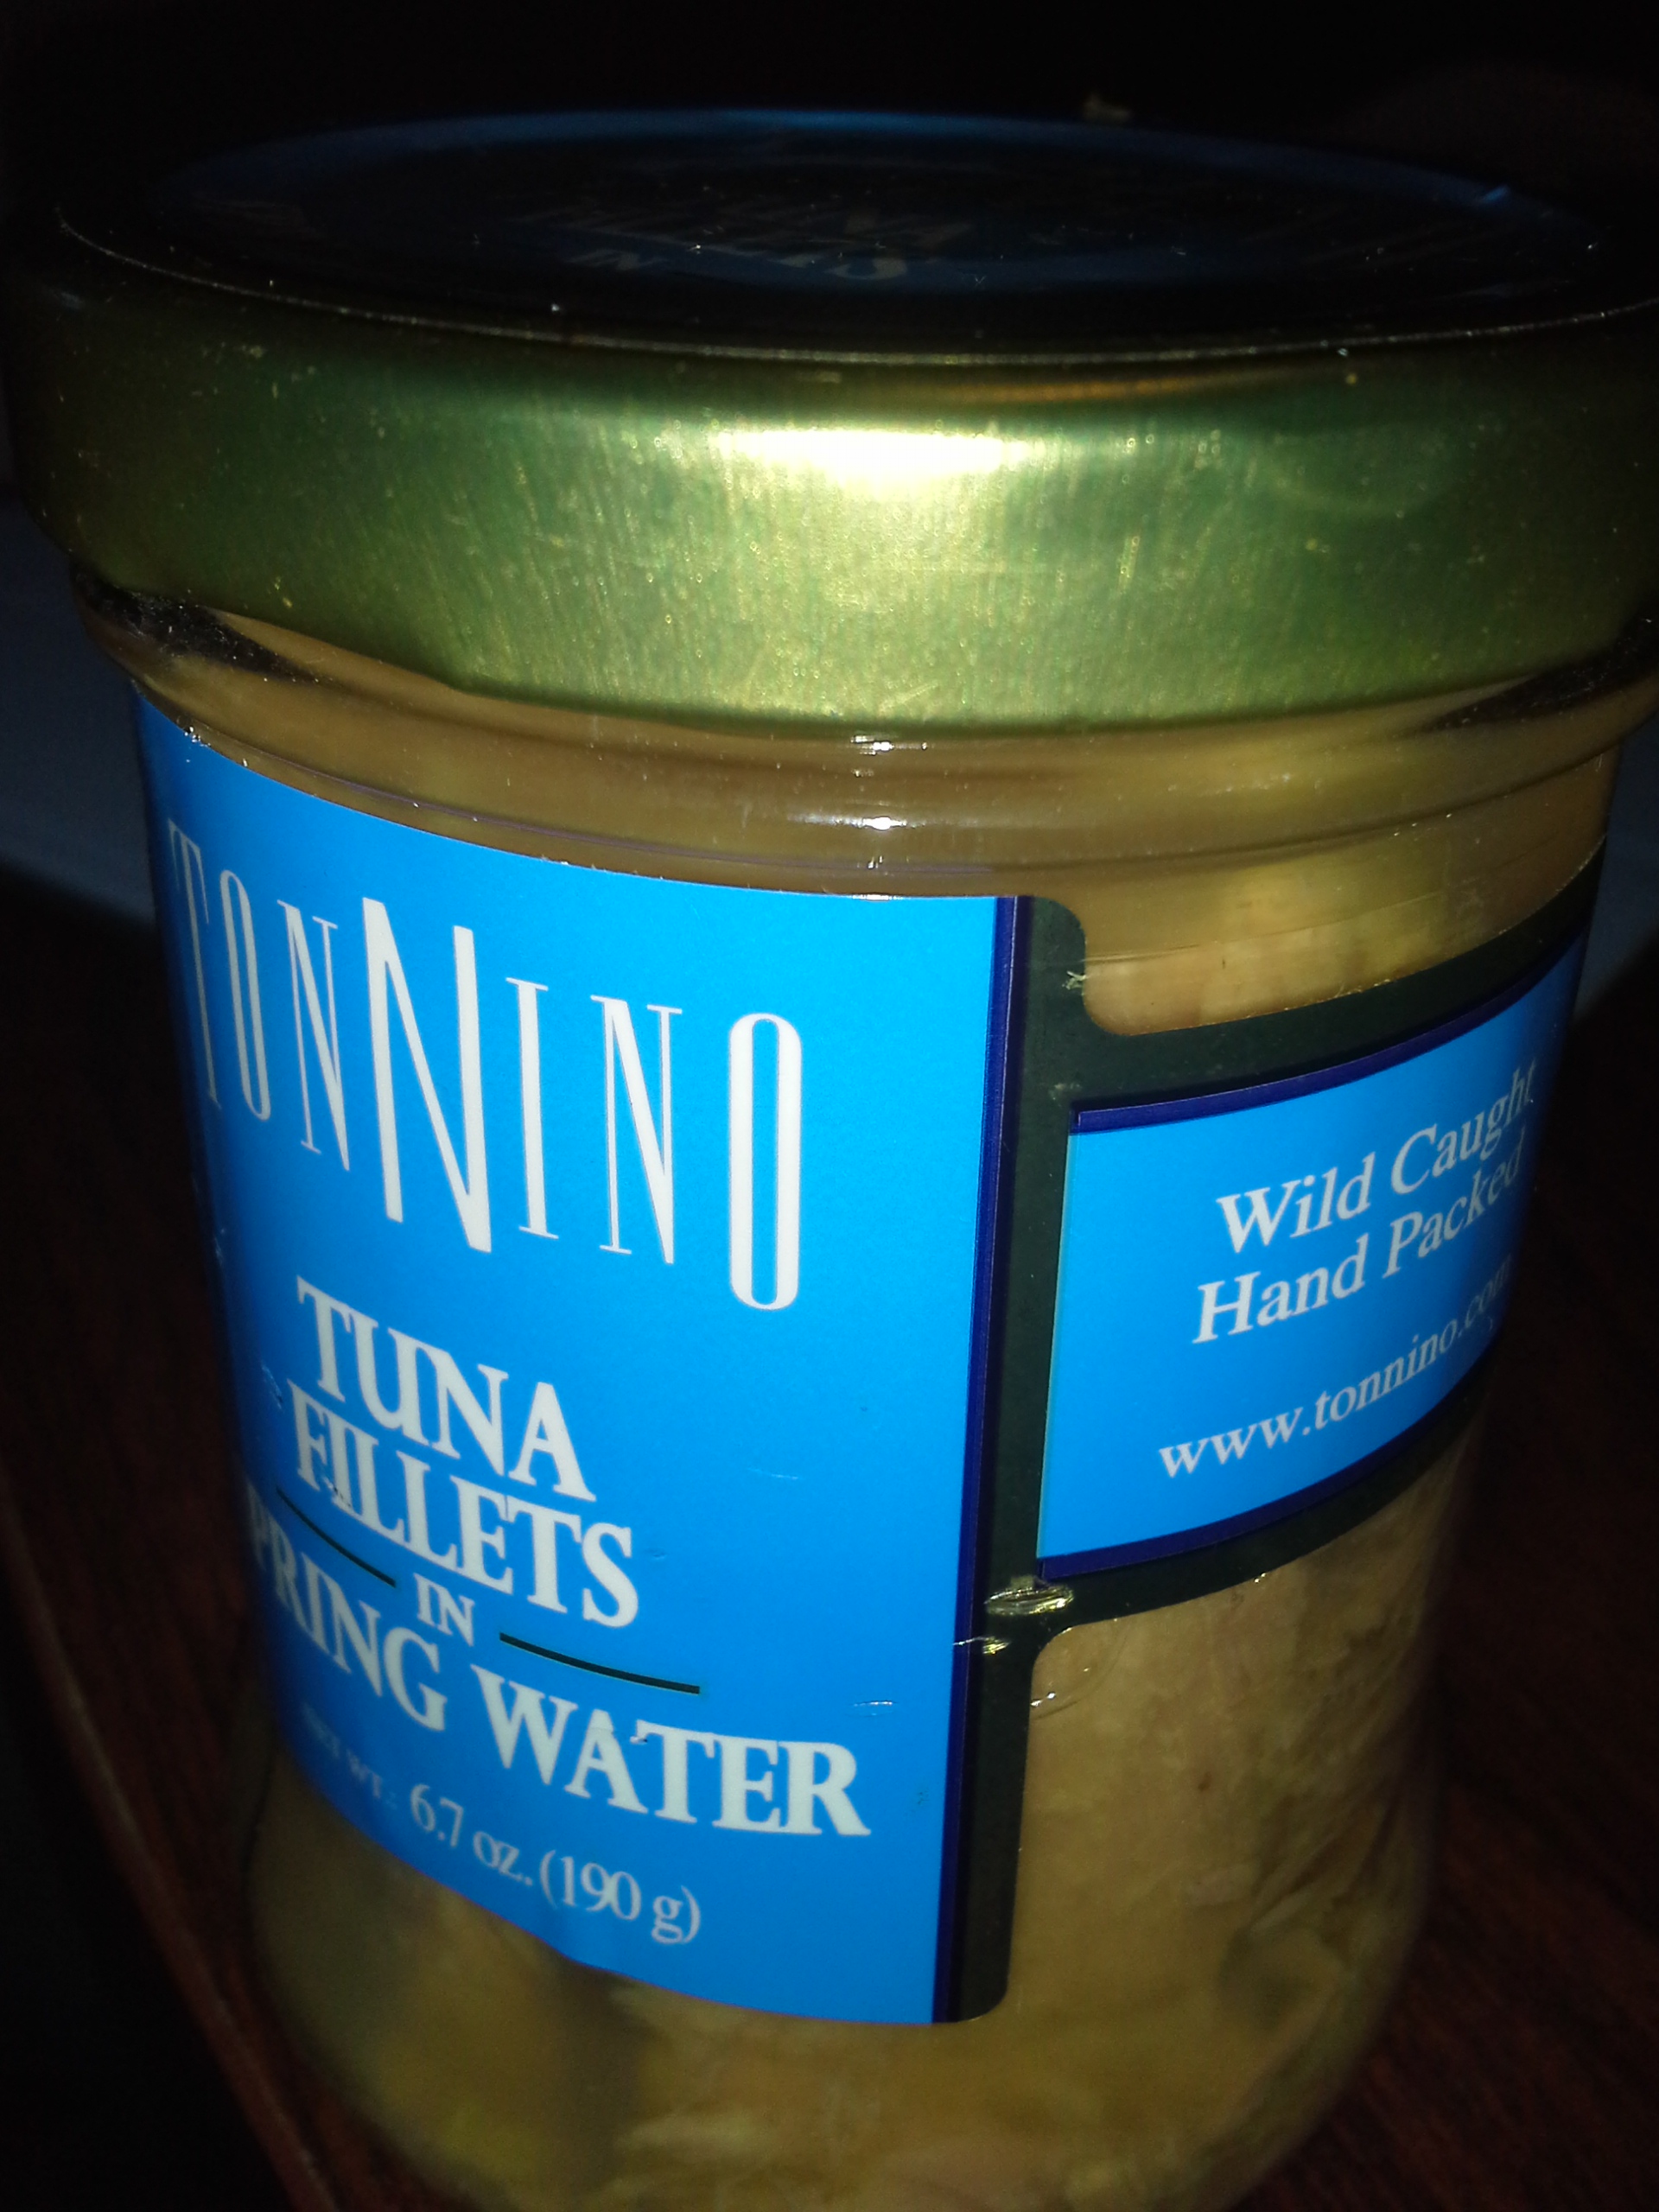 Lunch: 1:30 p.m. | 6.7 oz. tuna filets in spring water